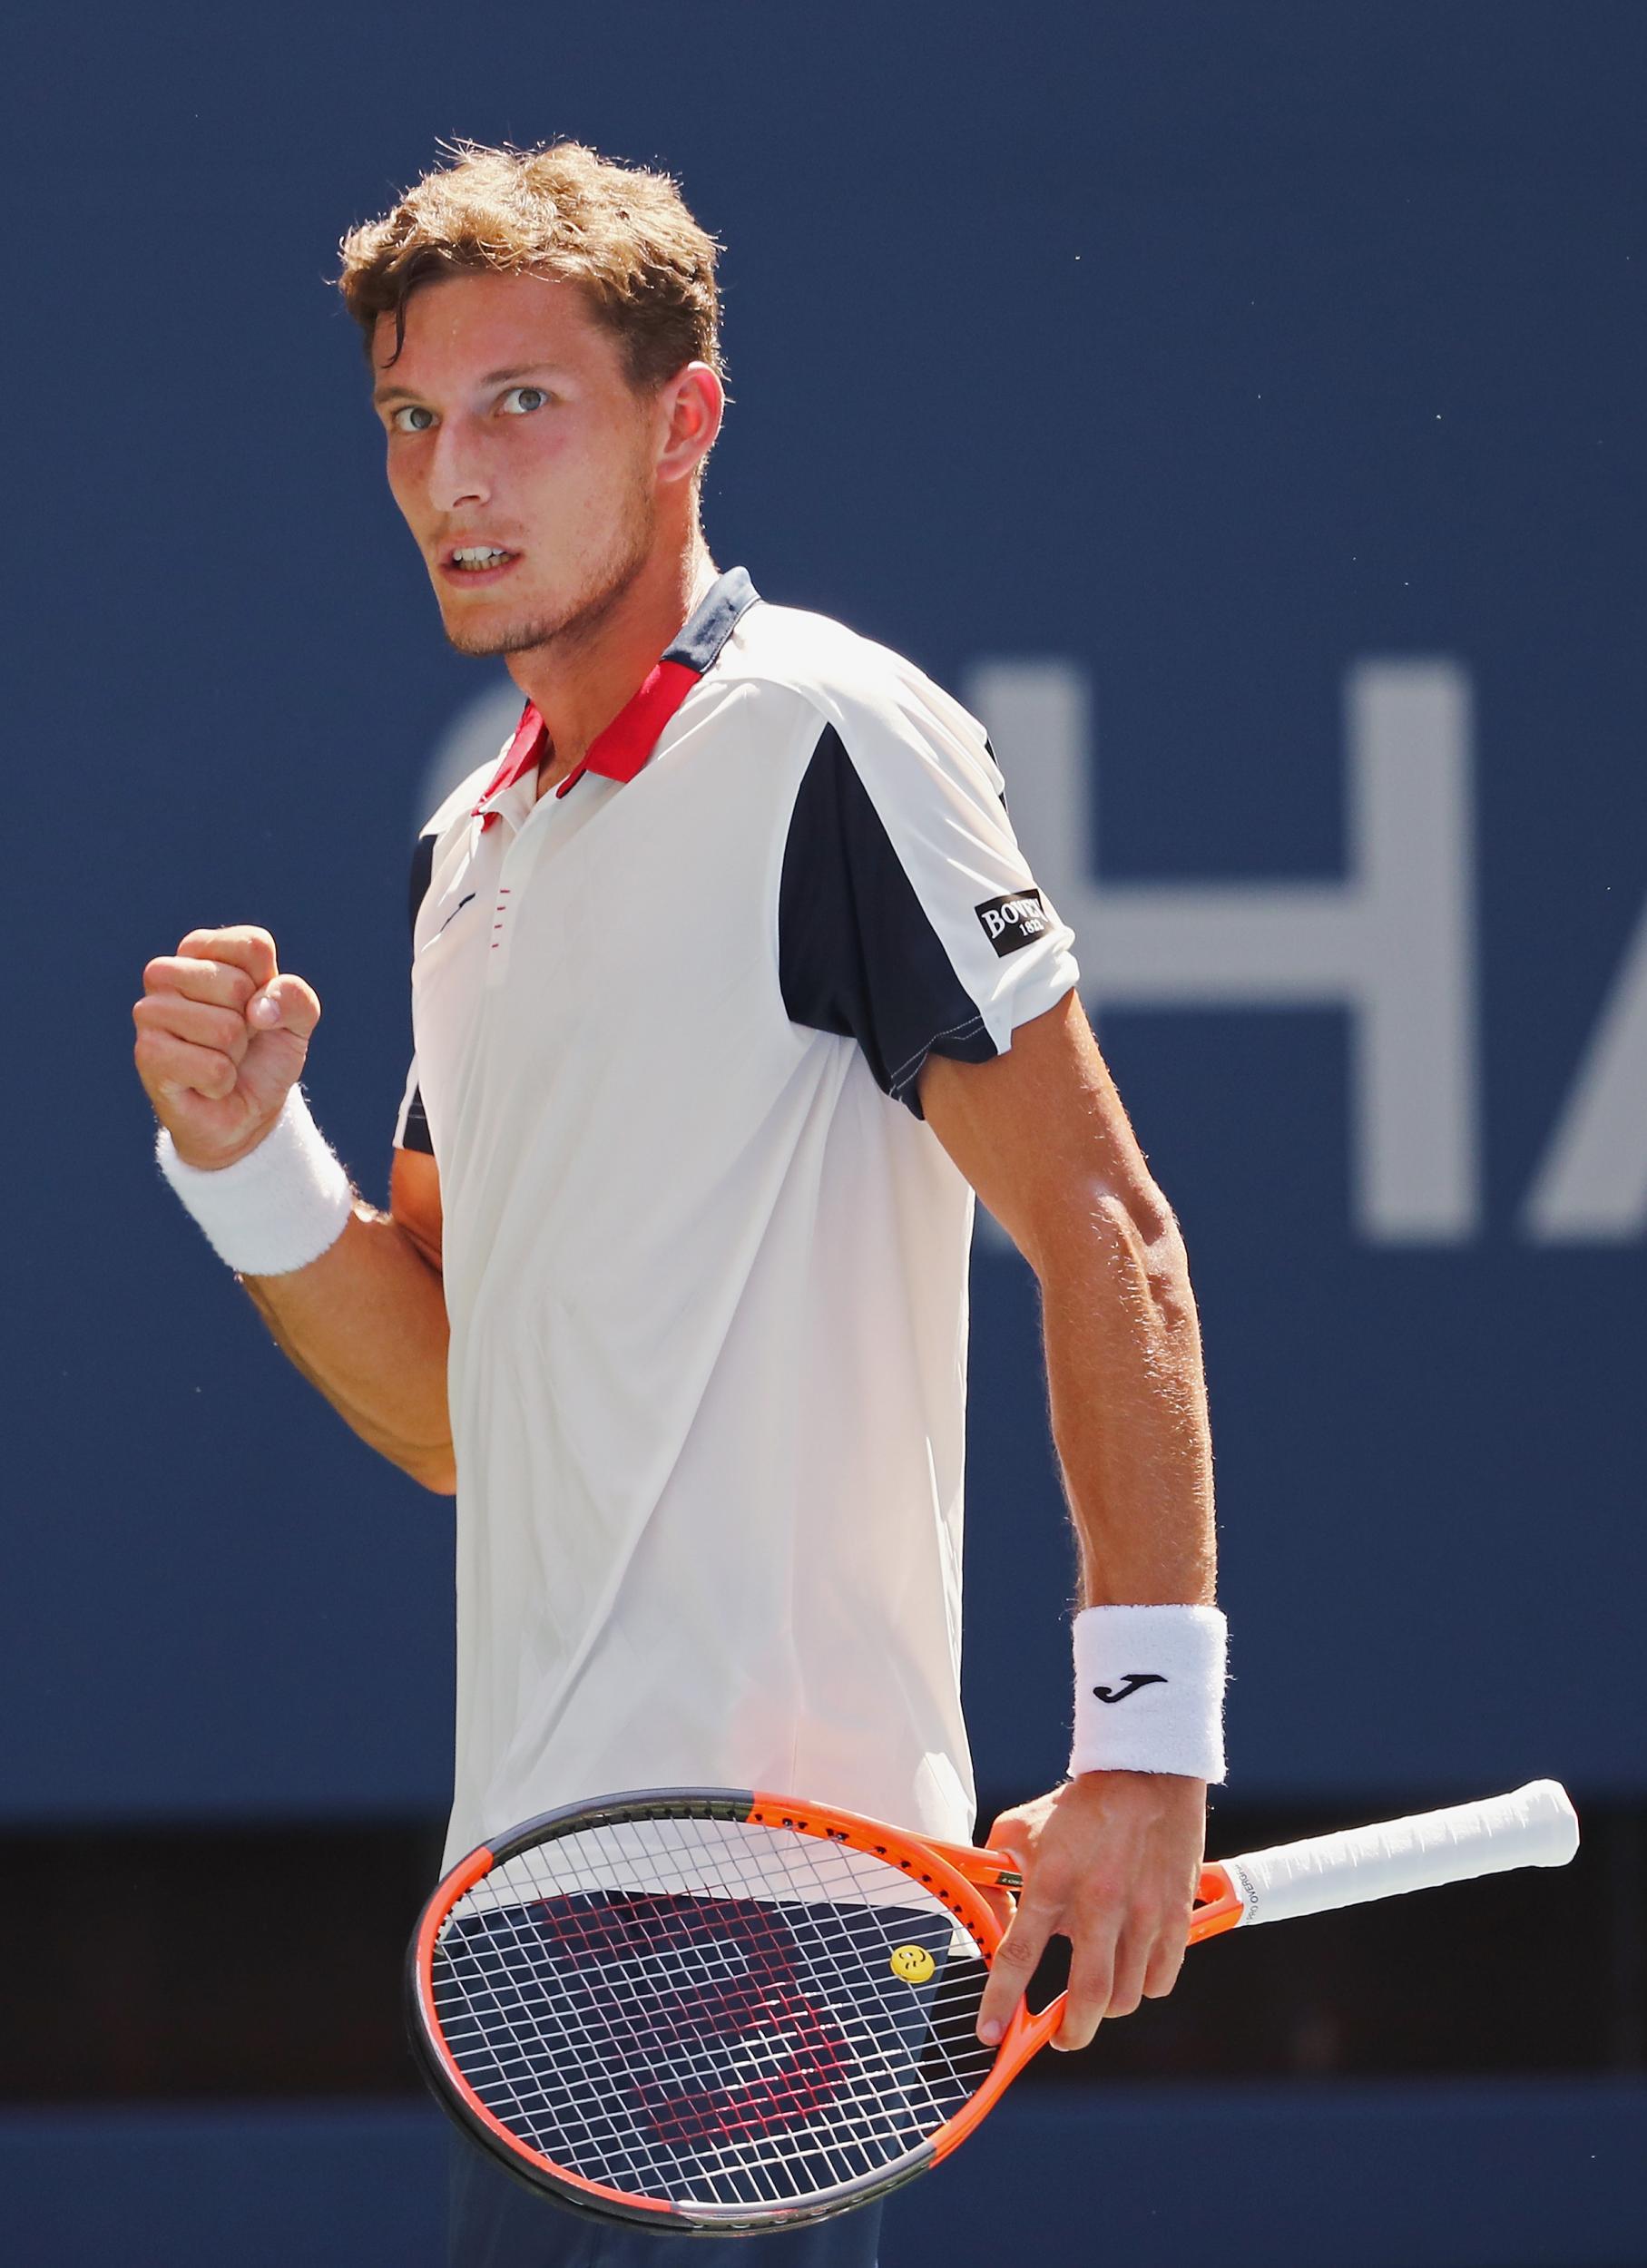 Carreno Busta was simply too good for his opponent